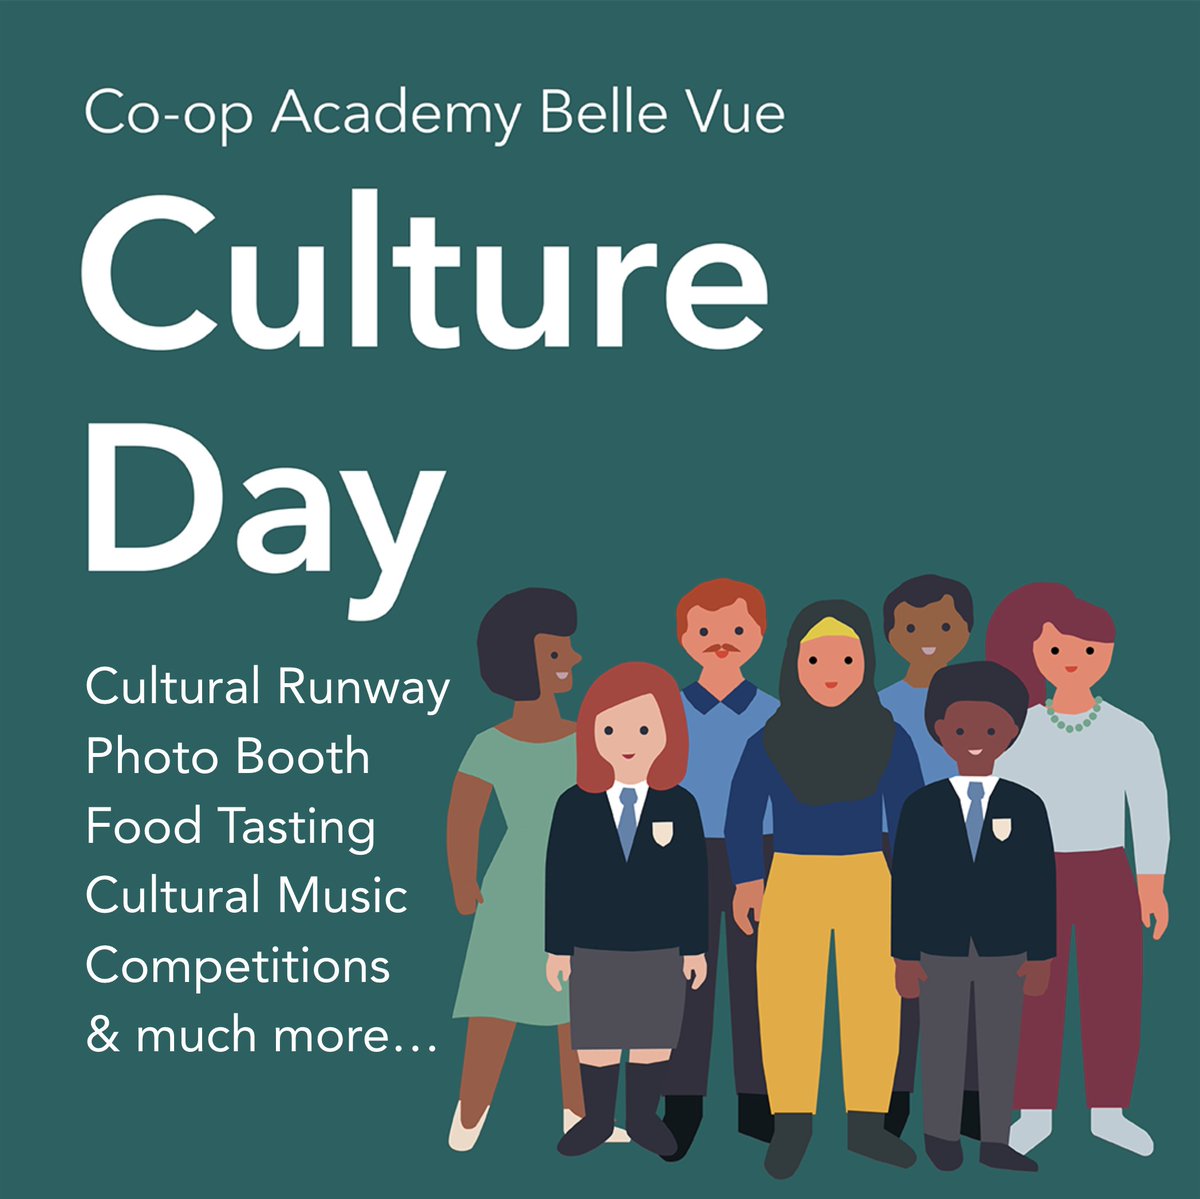 Our first Culture Day of the academic year takes place on Friday March 1st!